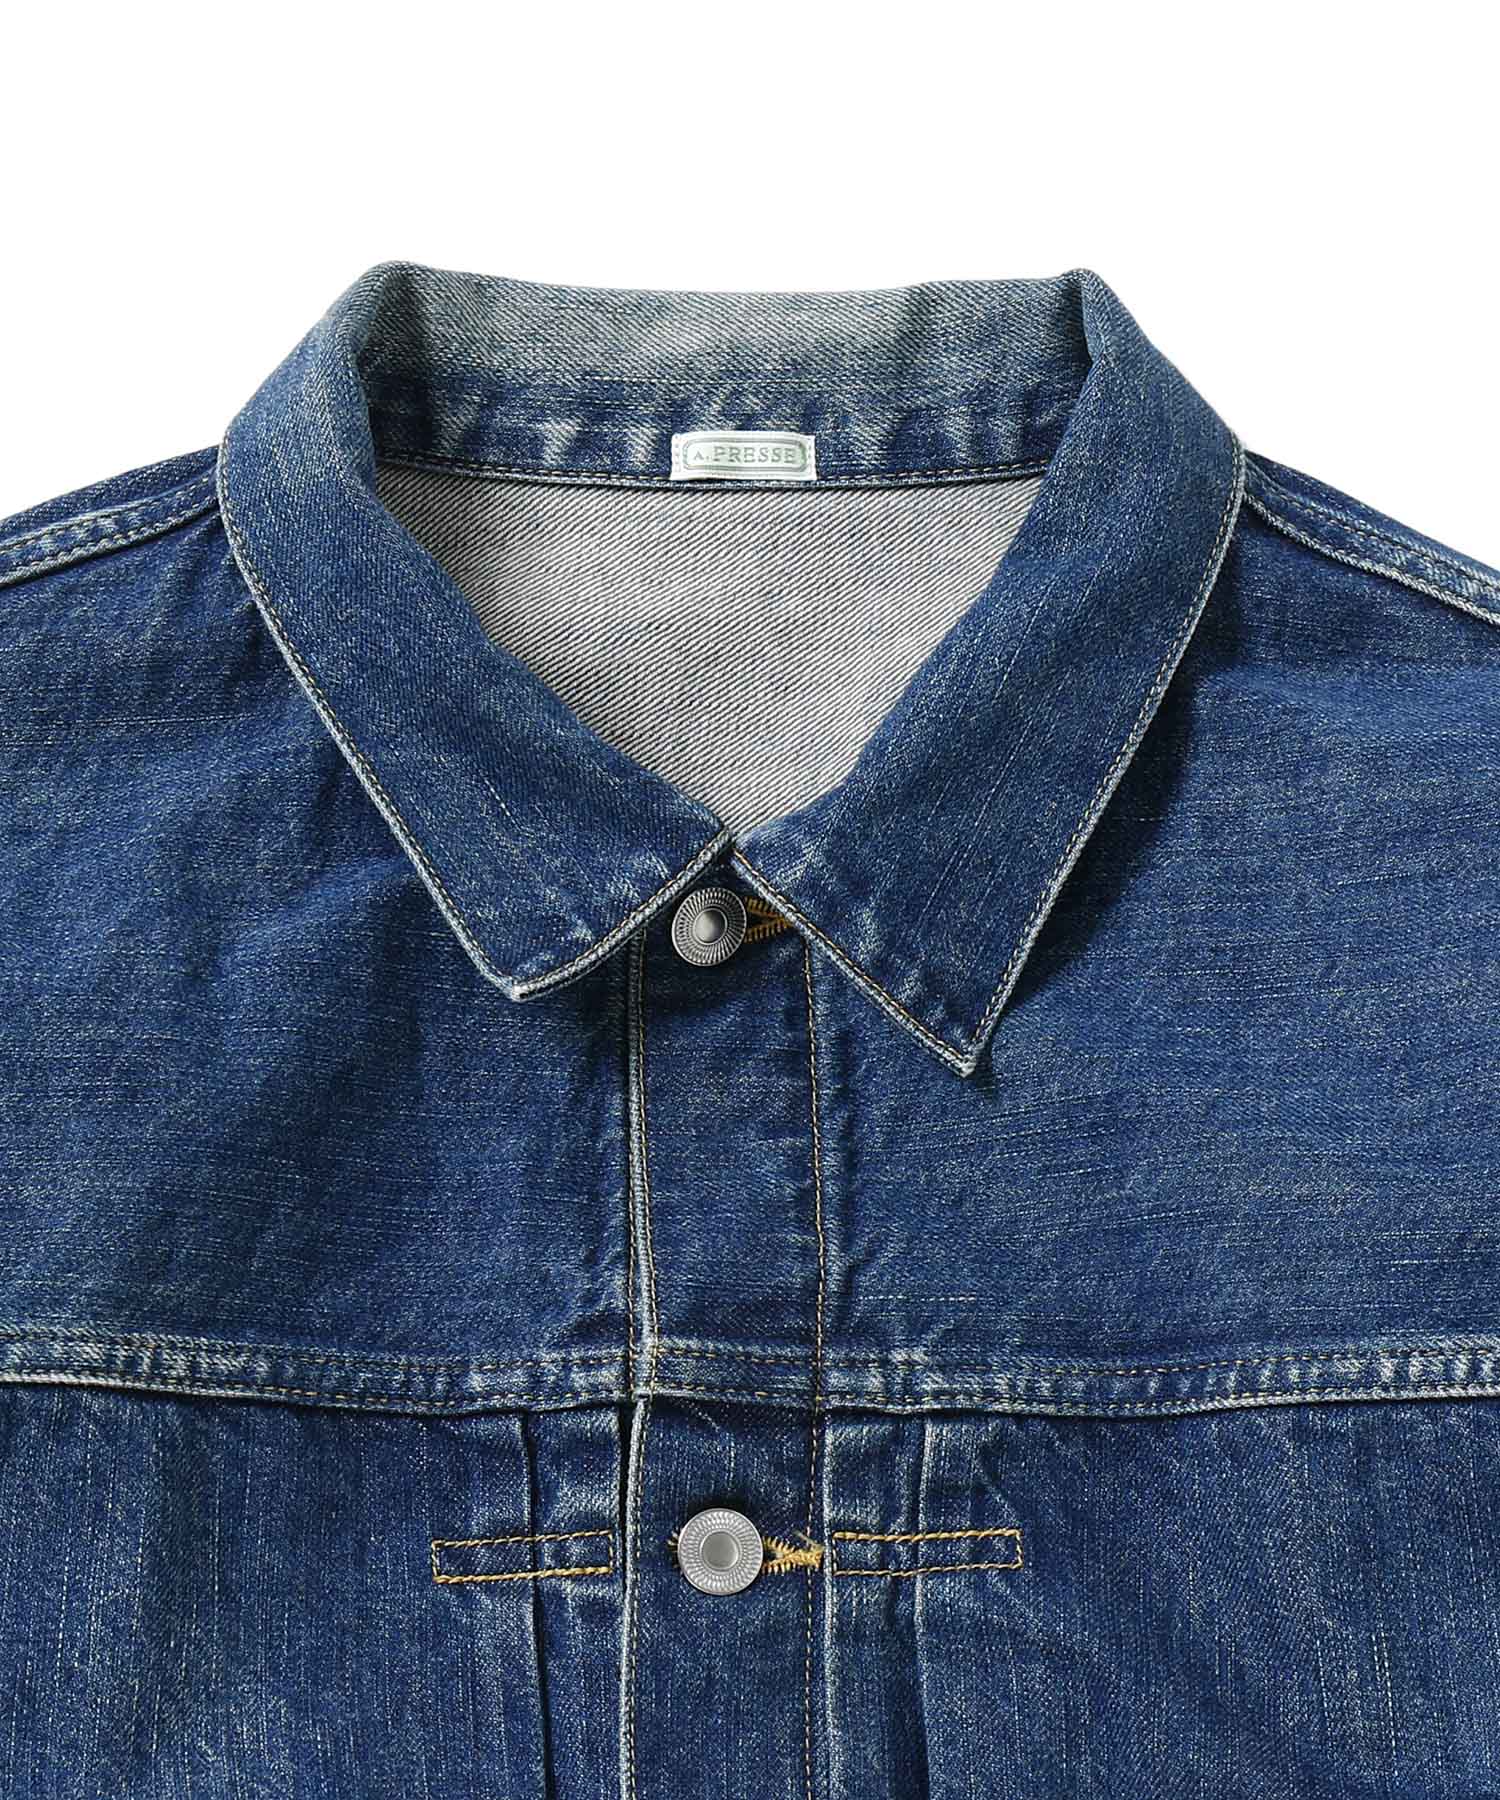 1st Type Denim Jacket - A.PRESSE (アプレッセ) - outer (アウター ...